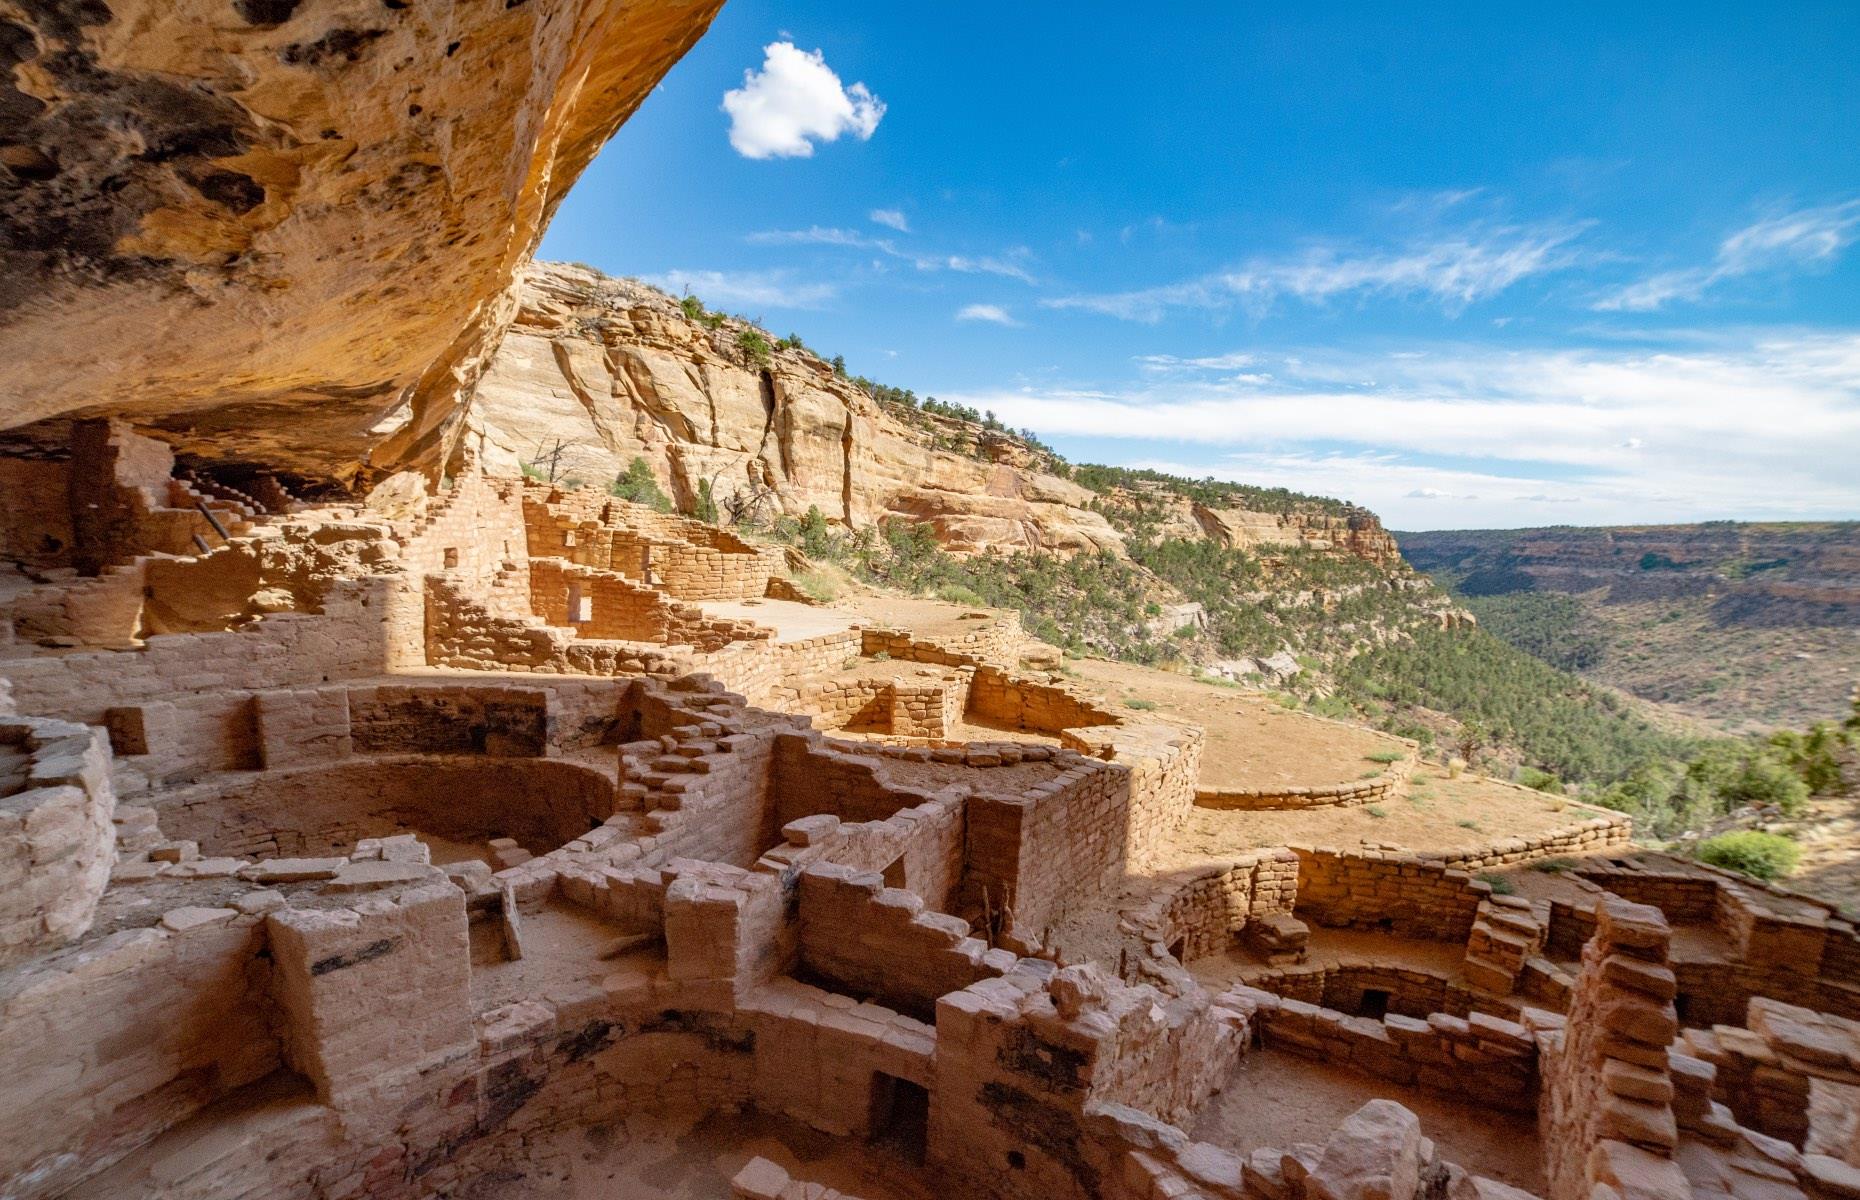 <p>No one knows exactly why the Puebloans started building homes within cliffs. The most common belief is that when the landscape became much drier as the climate became warmer, they decided to move nearer to the water. Also, because the Mesa Verde area is so high and exposed, being tucked under overhanging cliffs offered shelter from the cold winter winds and protection from wildfires. </p>